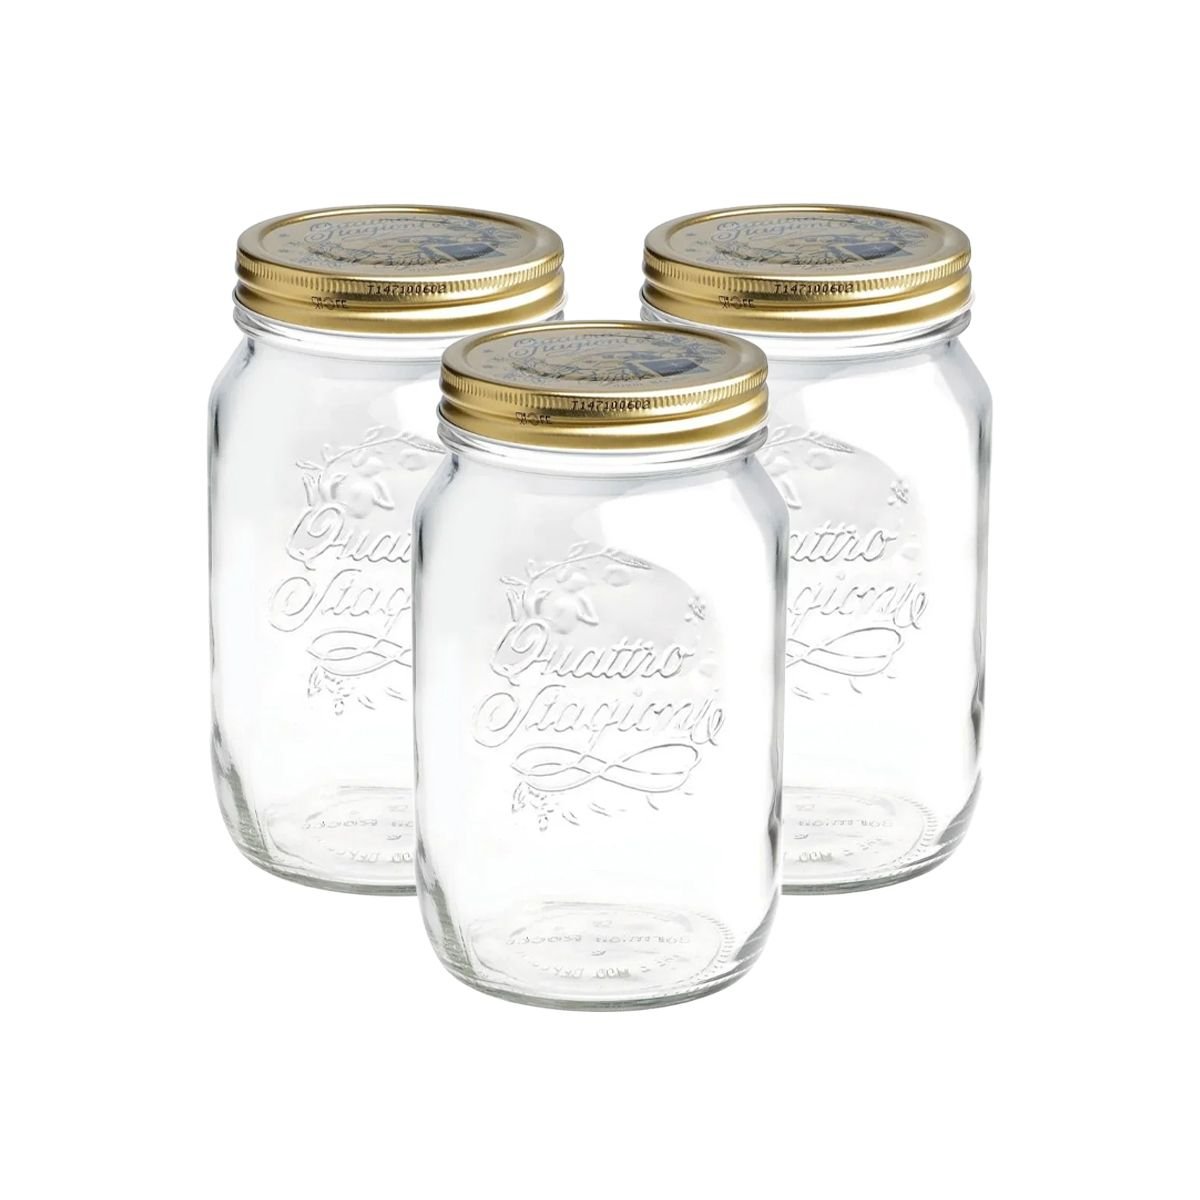 Bormioli Rocco Quattro Stagioni Variety Pack, Set Of 3 Mason Jars - Salt  And Spice Shaker - Grater - Sifter, Strainers, Sieve - 11 Oz. Durable  Glass